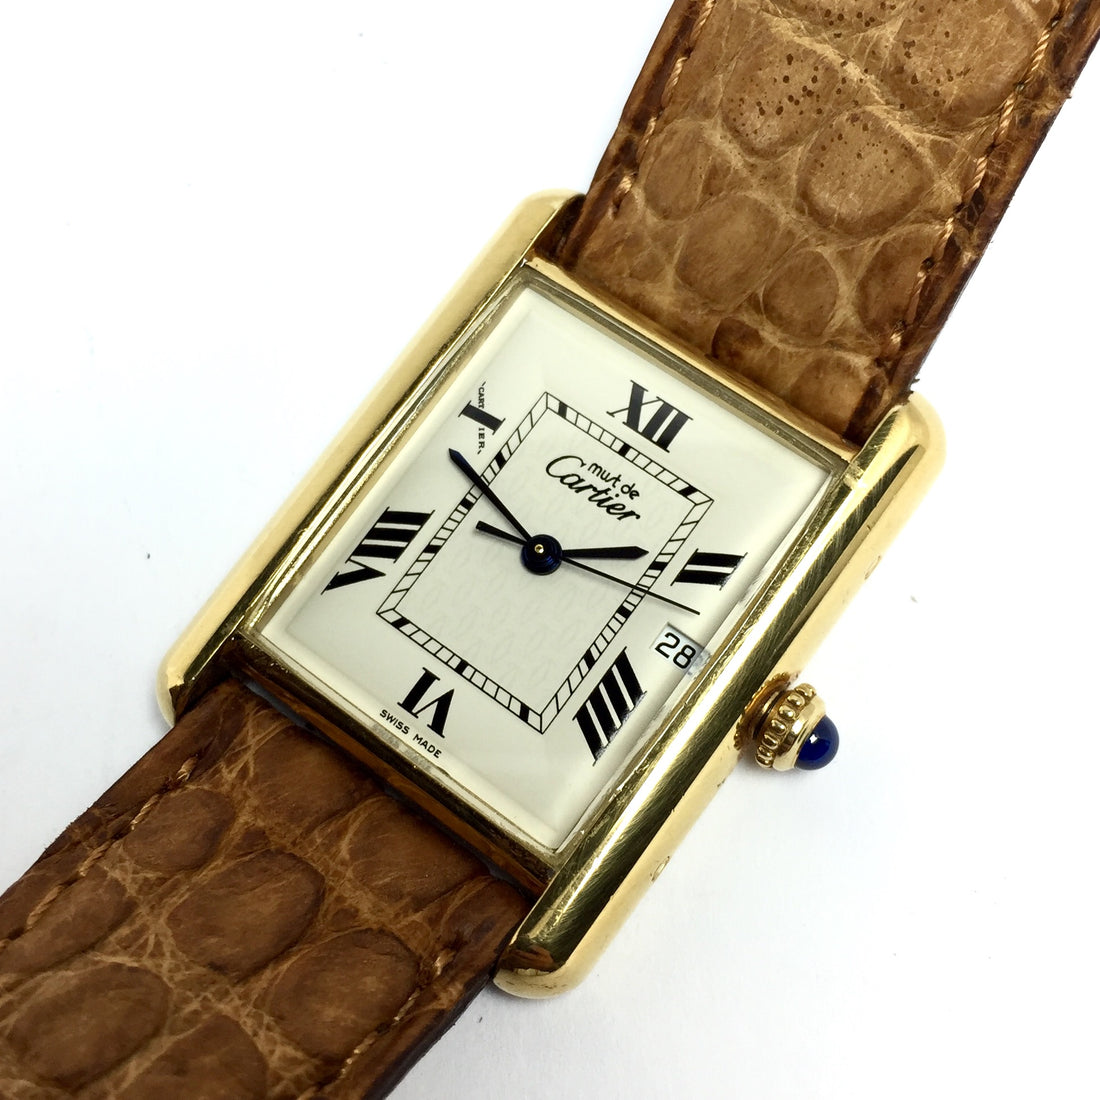 History of CARTIER TANK Watch